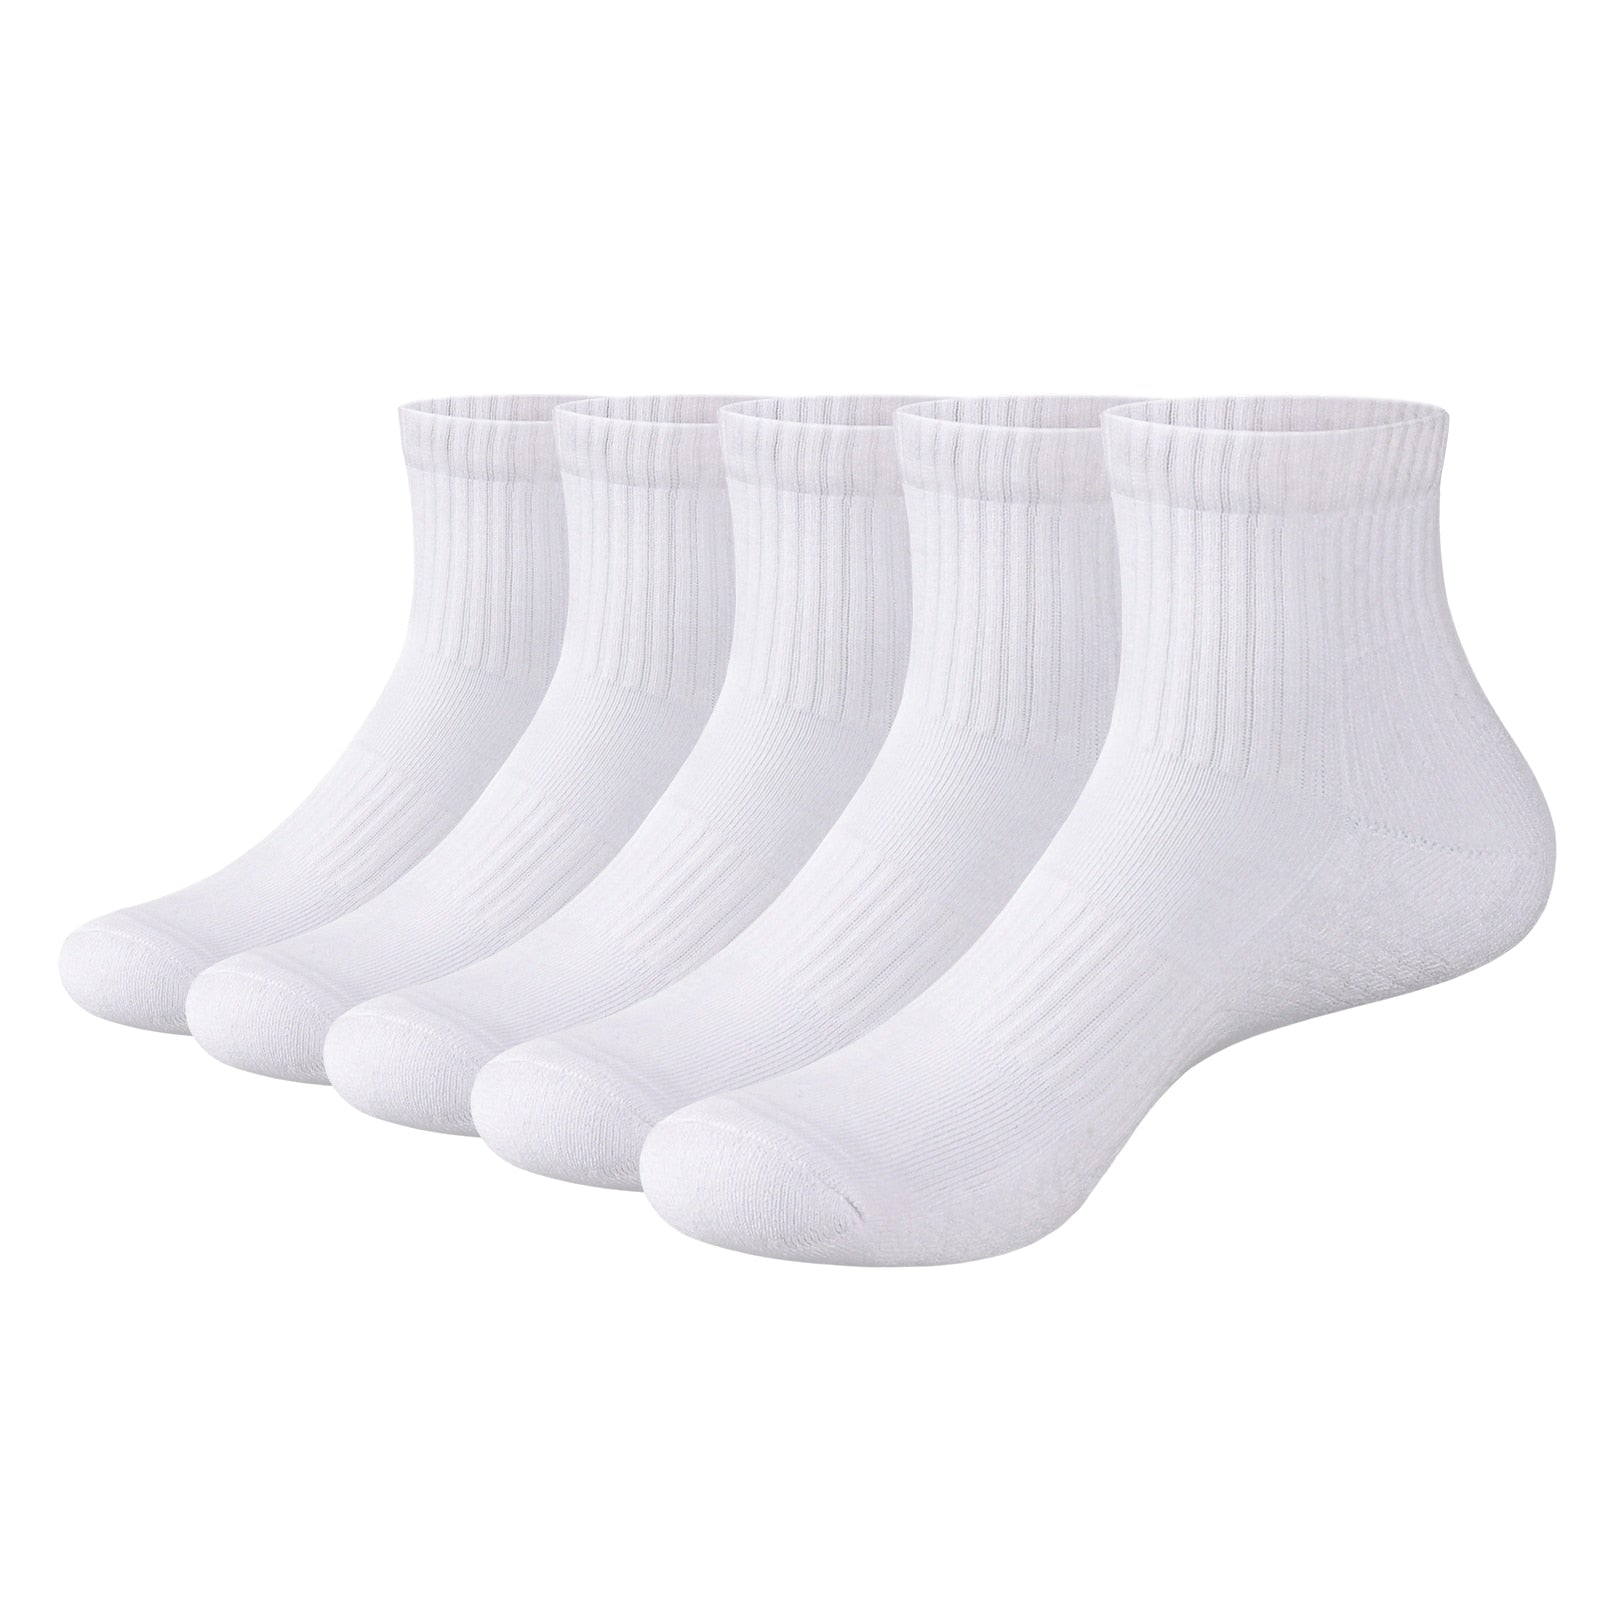 Men Moisture Wicking Fitness Training Athletic Socks Combed Cotton Cushioned Mid Calf